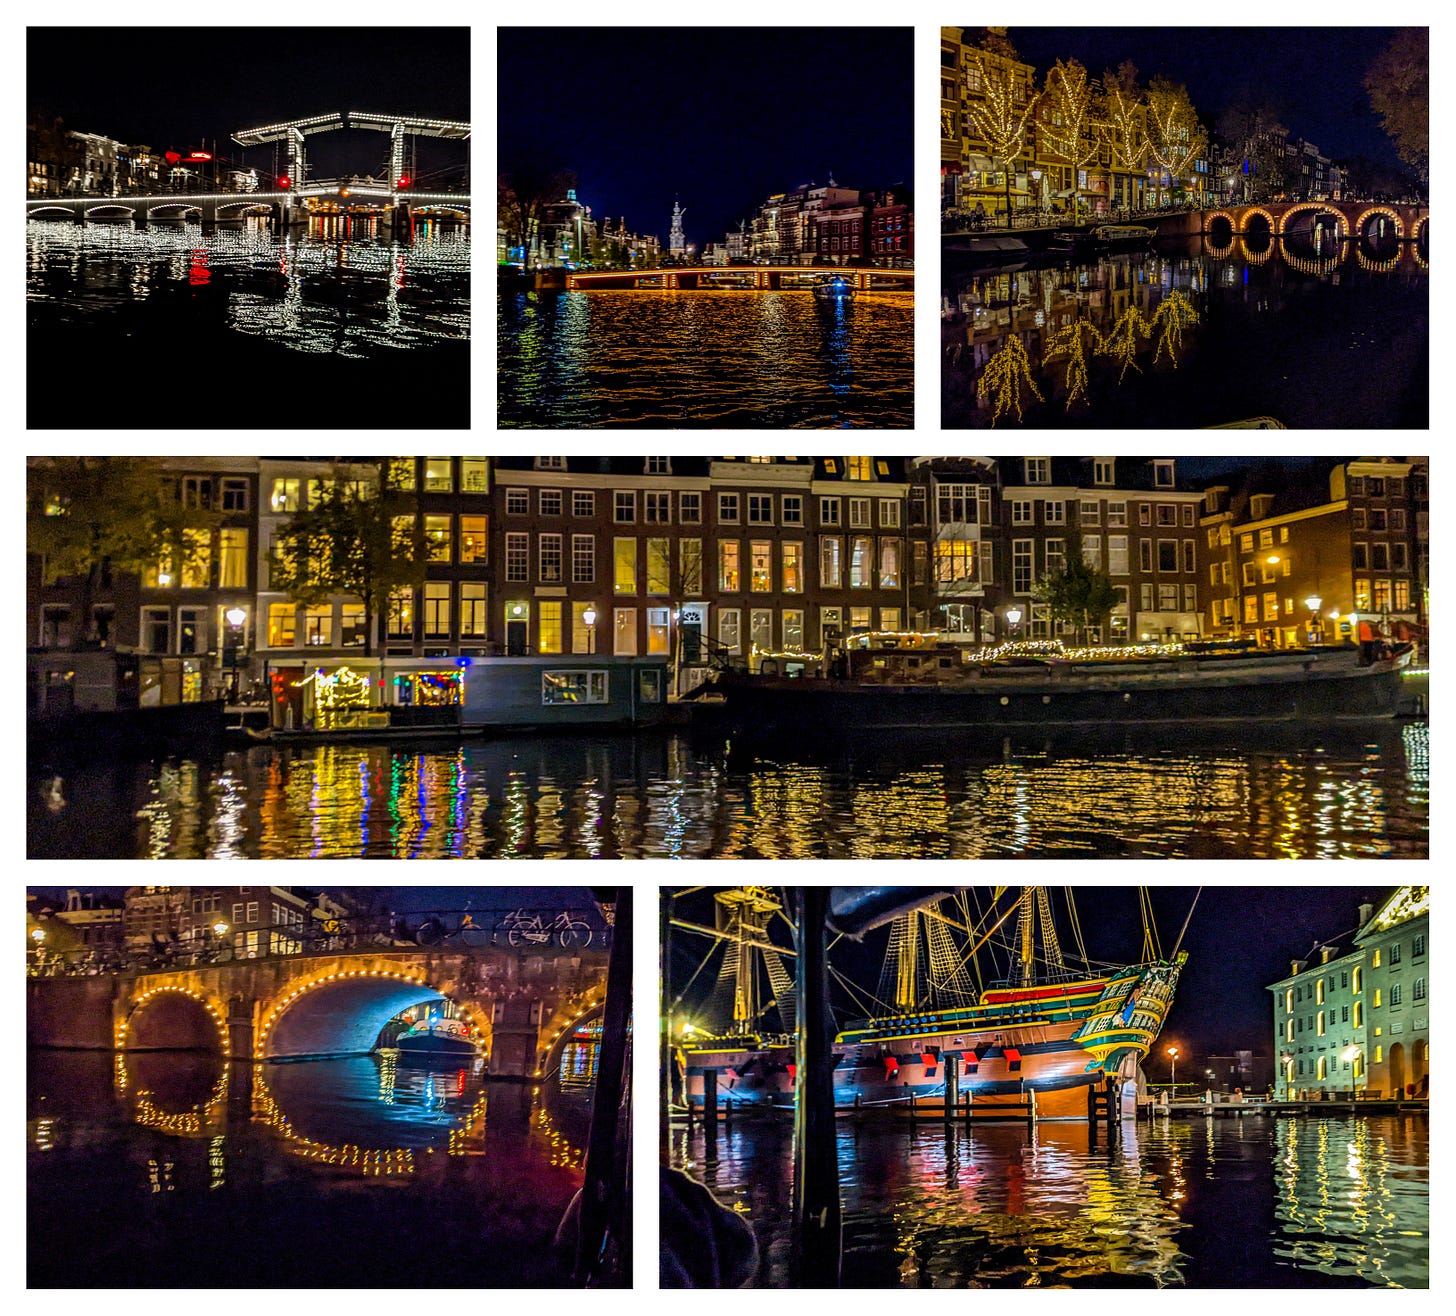 A variety of pictures showing Amsterdam's bridges at night as well as an old-fashioned trading ship, all light up at night. 